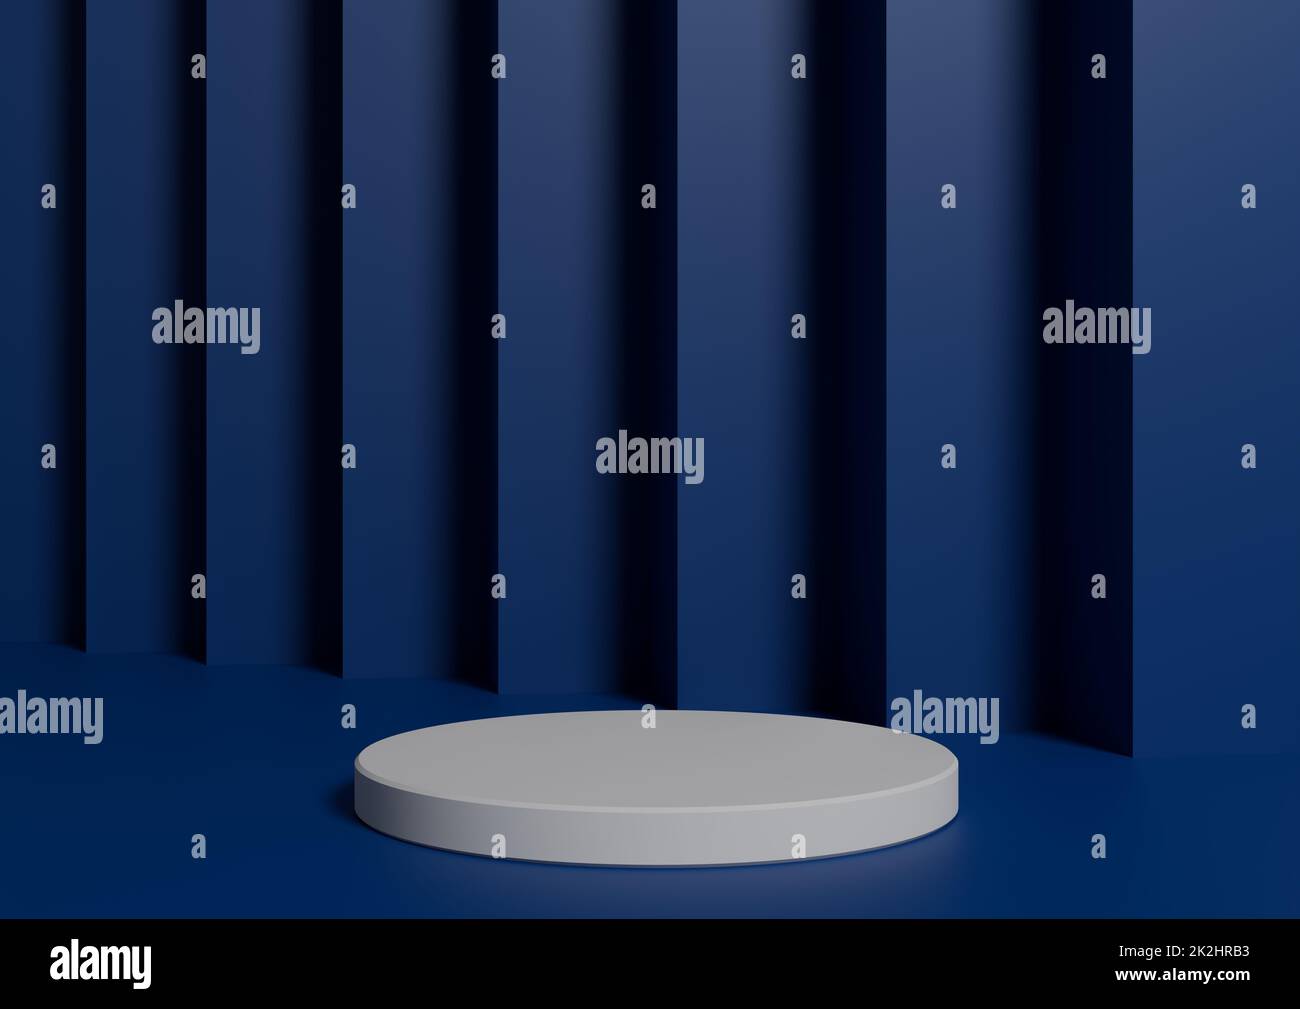 Simple, Minimal 3D Render Composition with One White Cylinder Podium or Stand on Abstract Royal Blue Background for Product Display Stock Photo